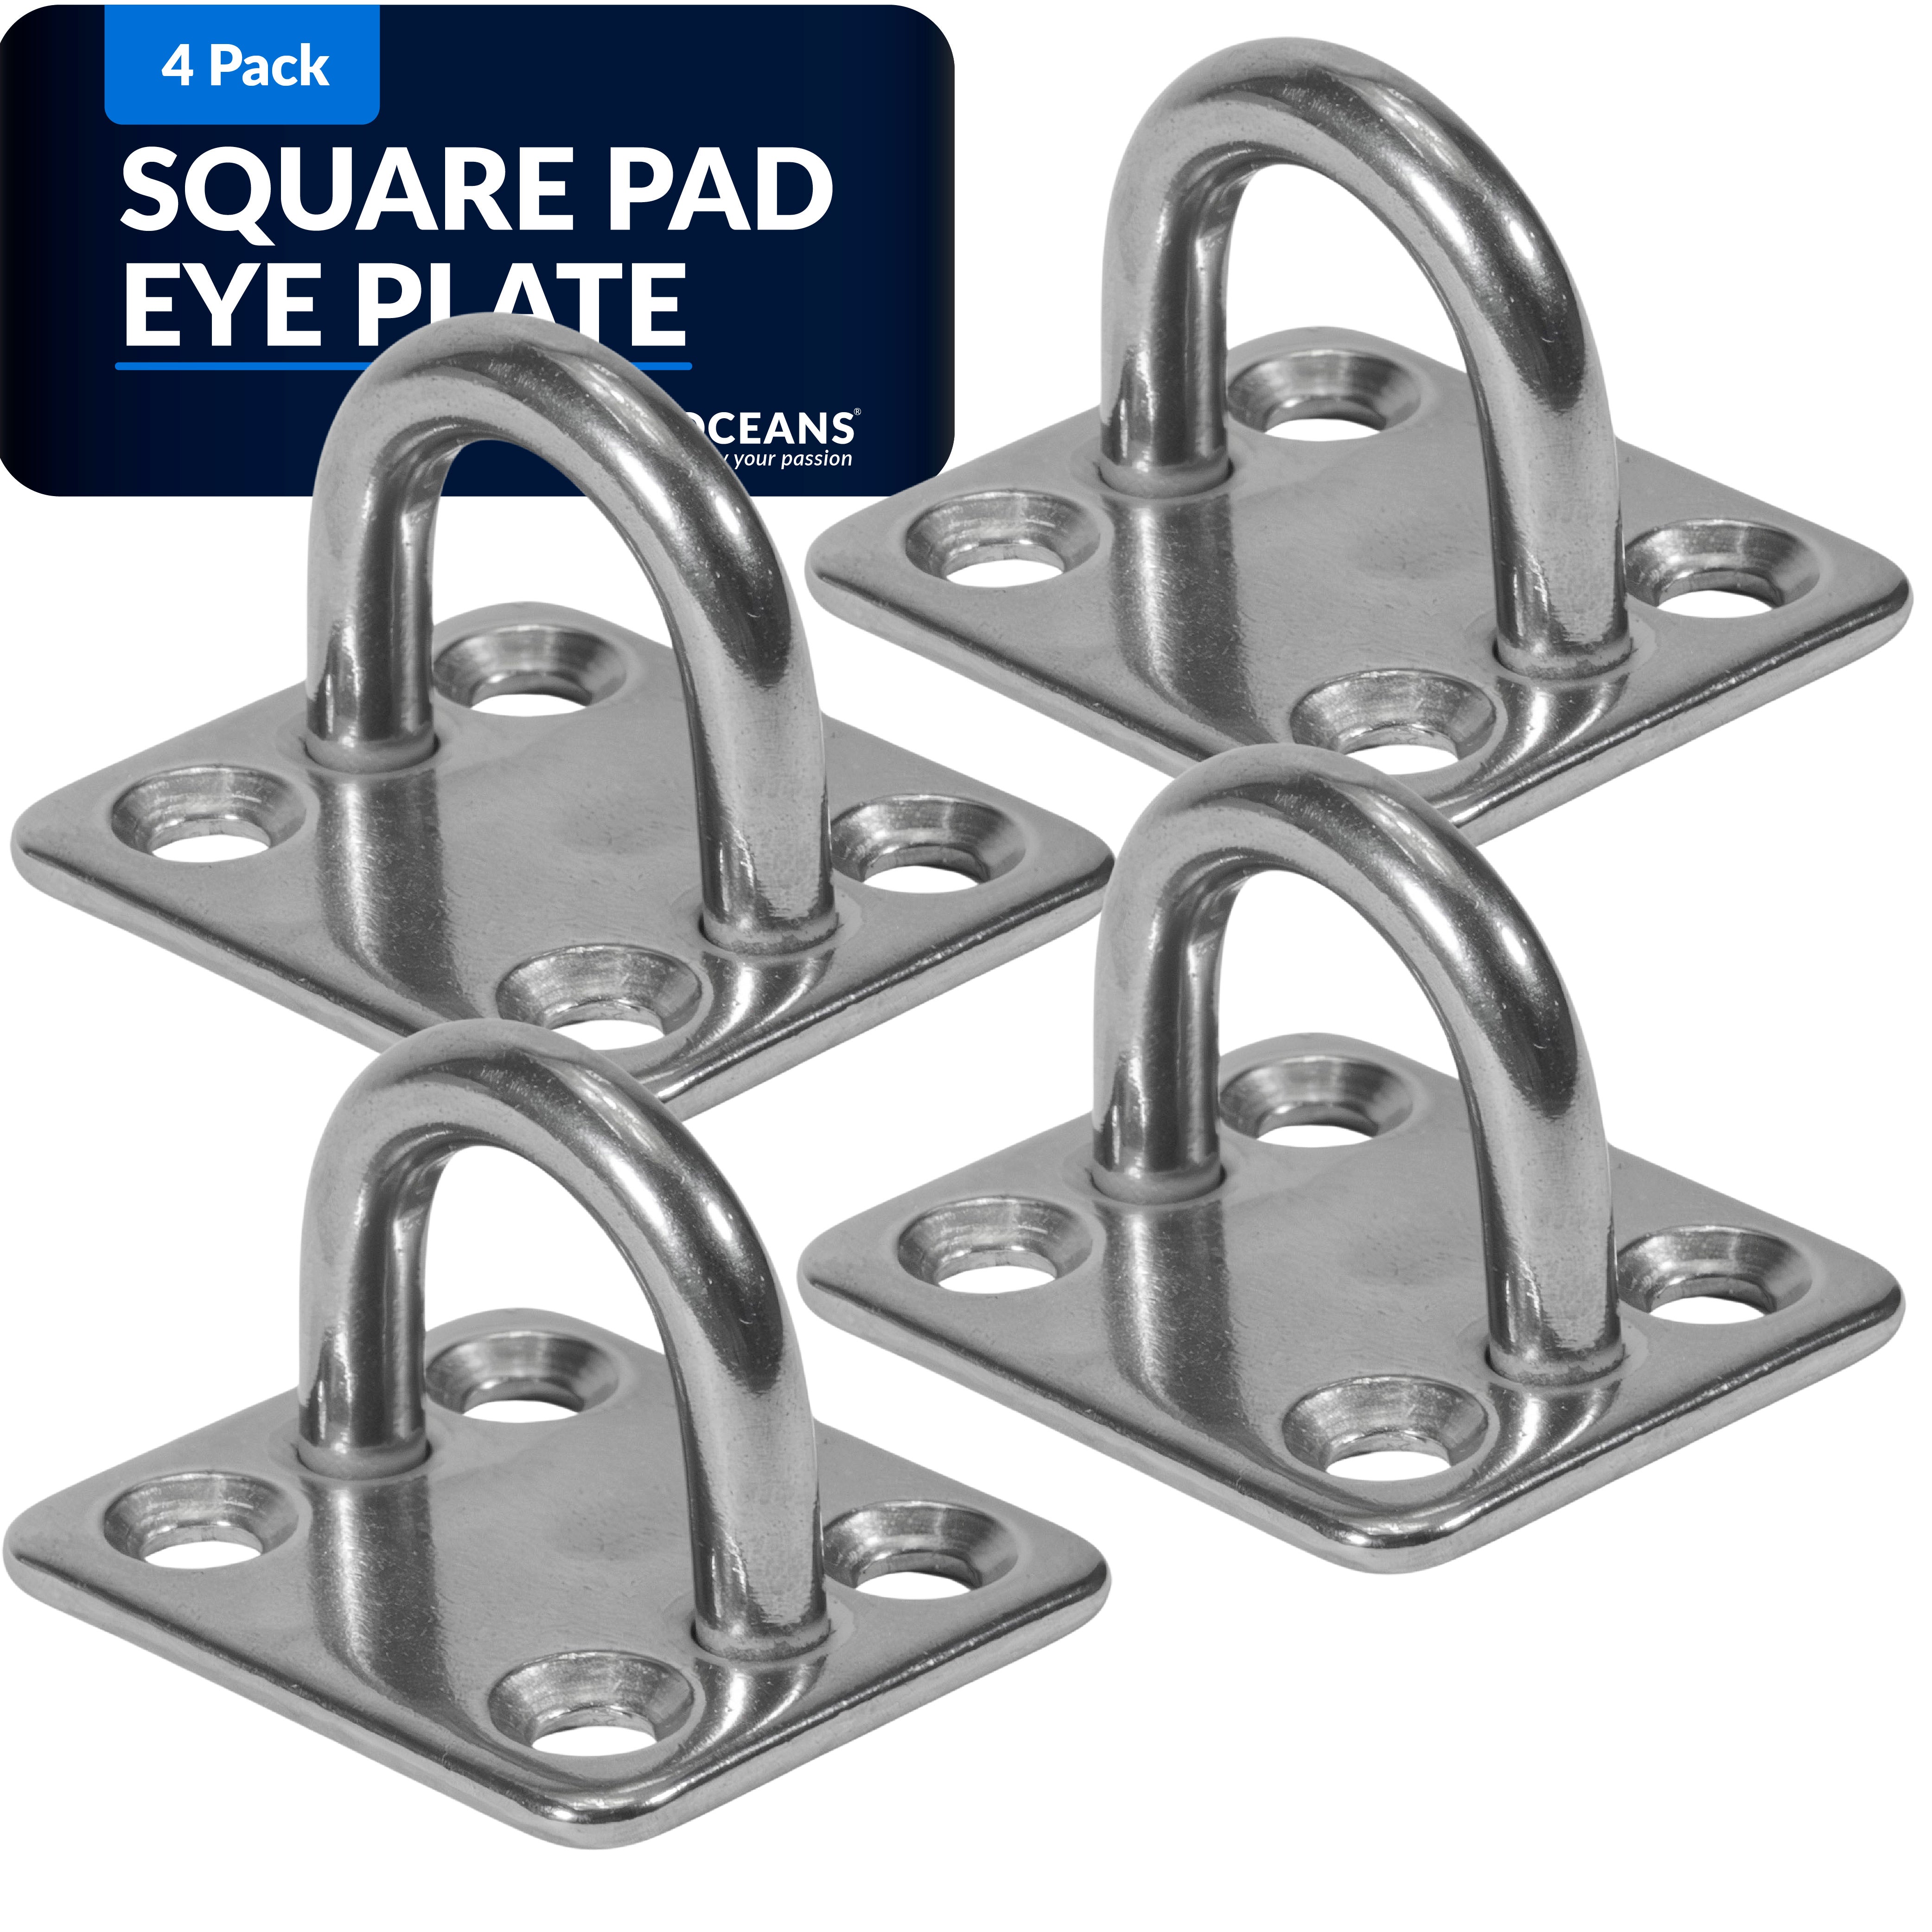 Heavy Duty 1/4" Stainless Steel Square Pad Eye, 4-Pack - FO2100-M4